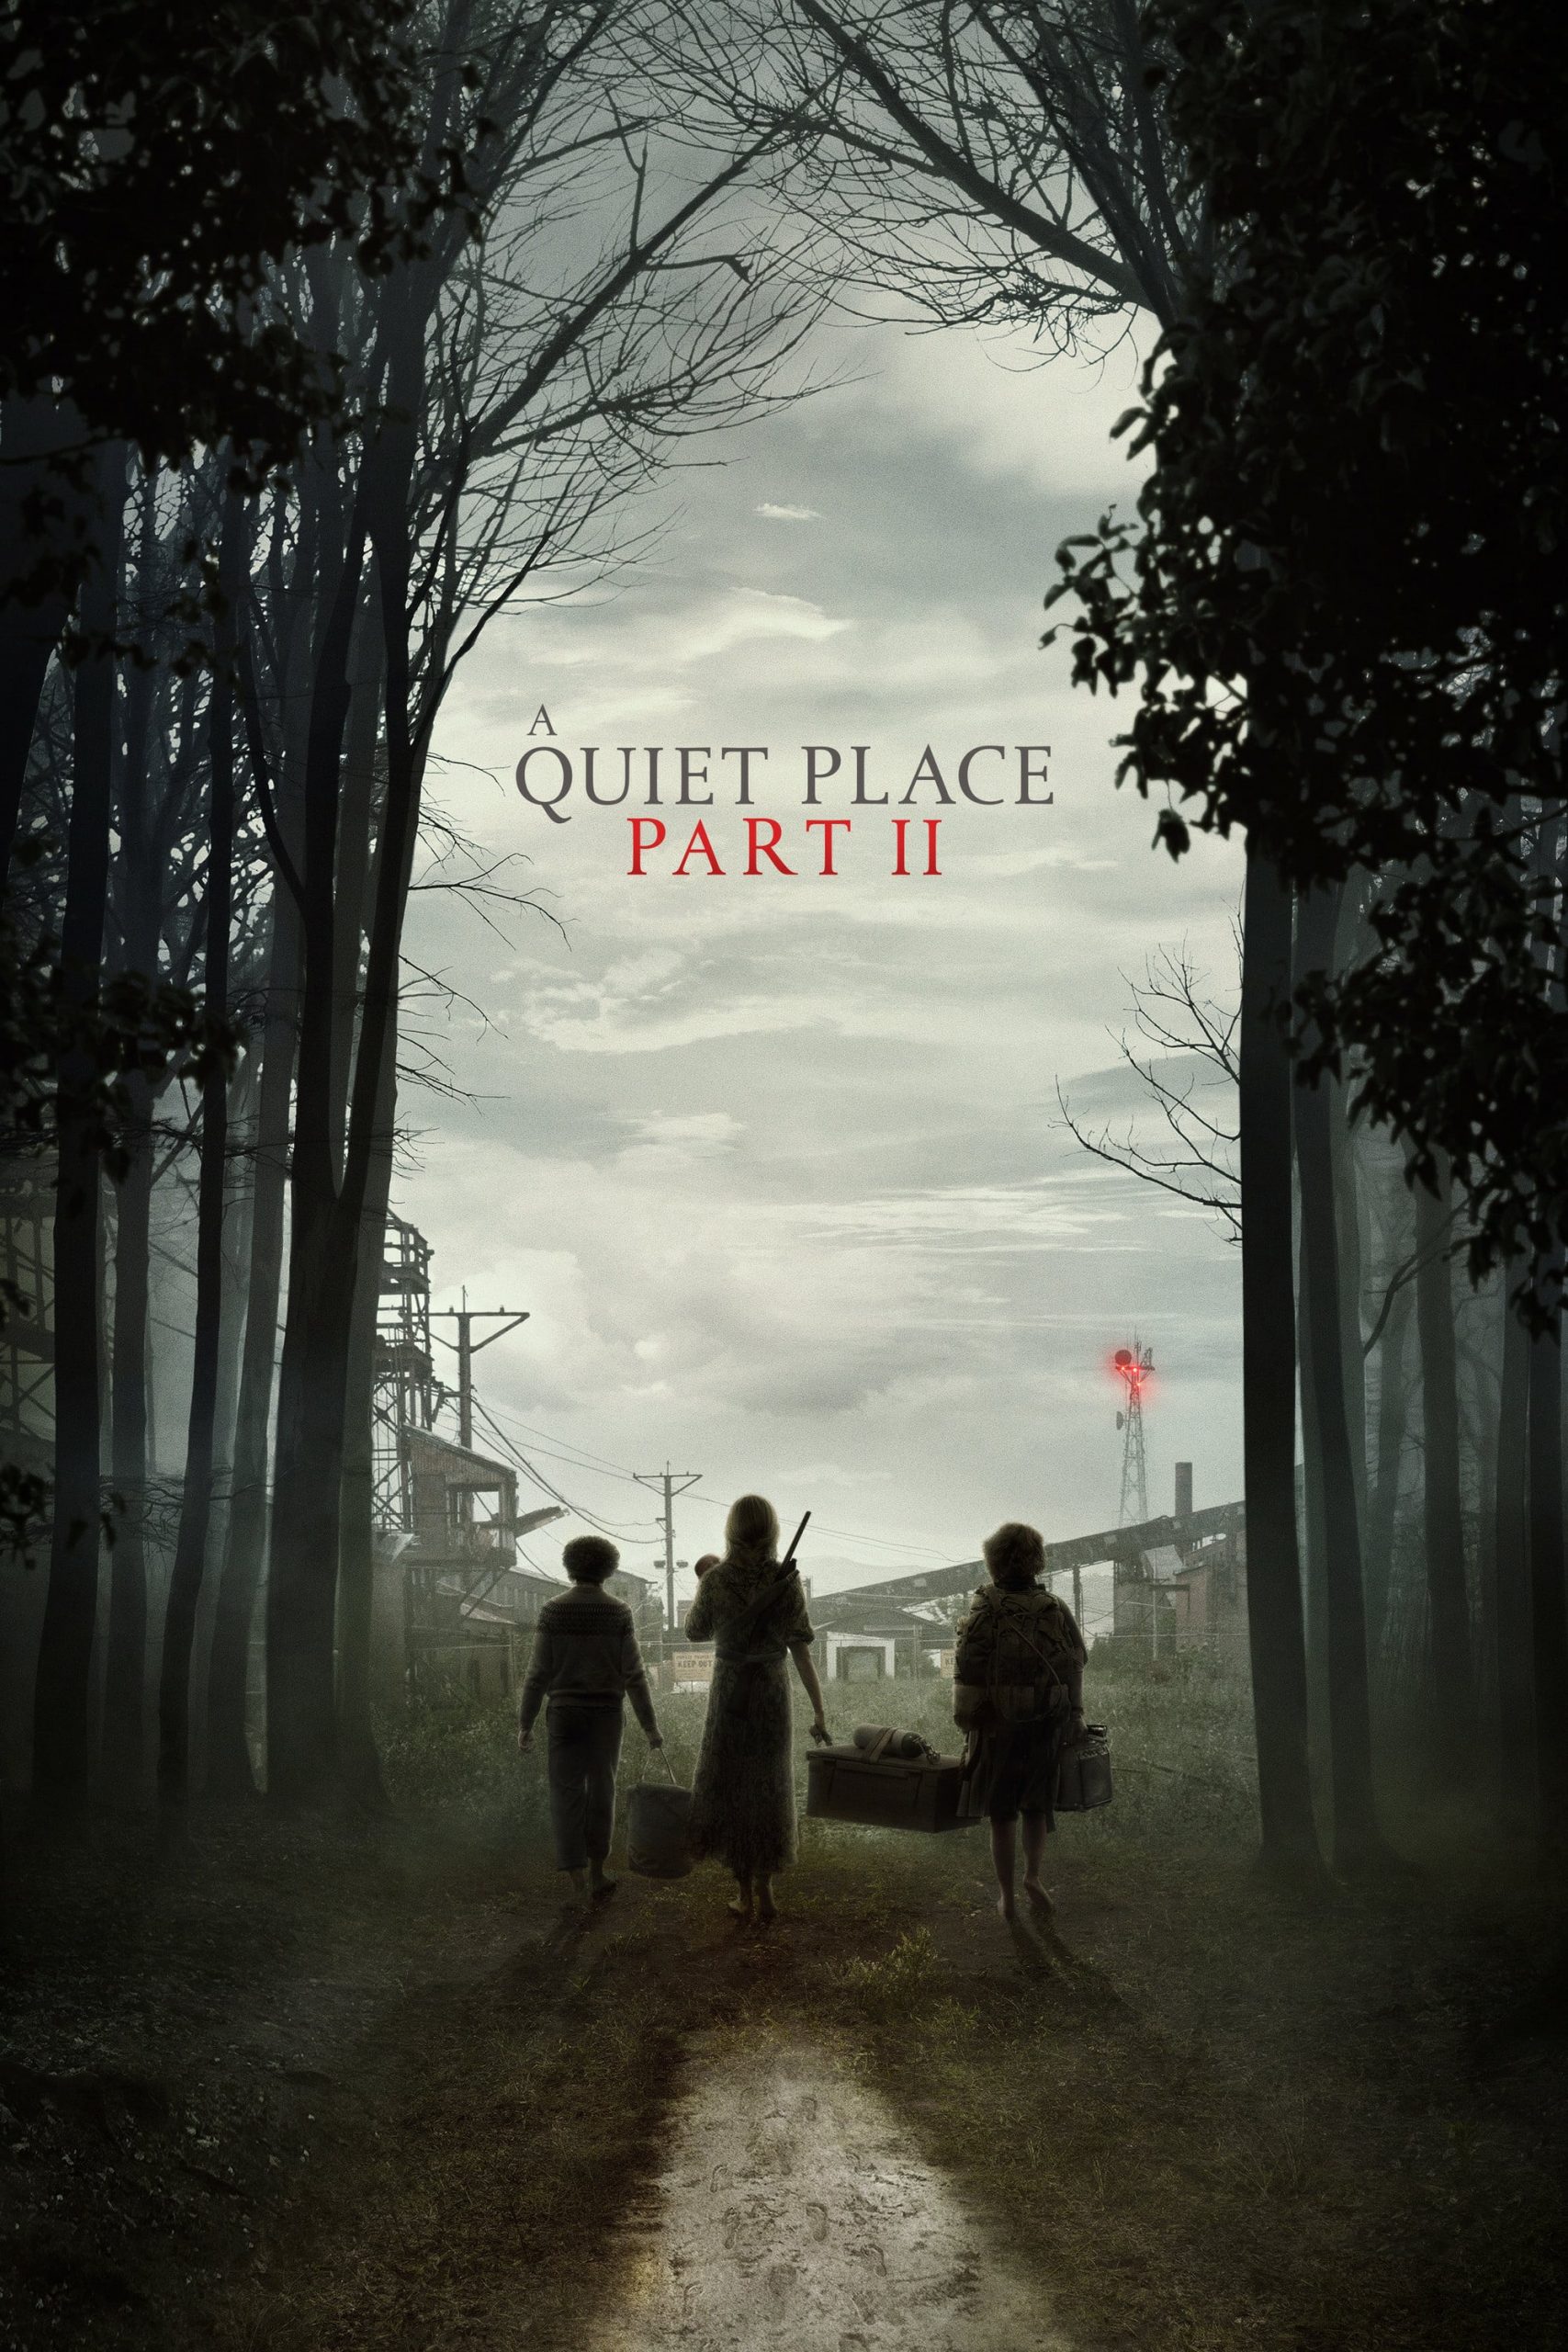 A Quiet Place 2: How to watch and Livestream